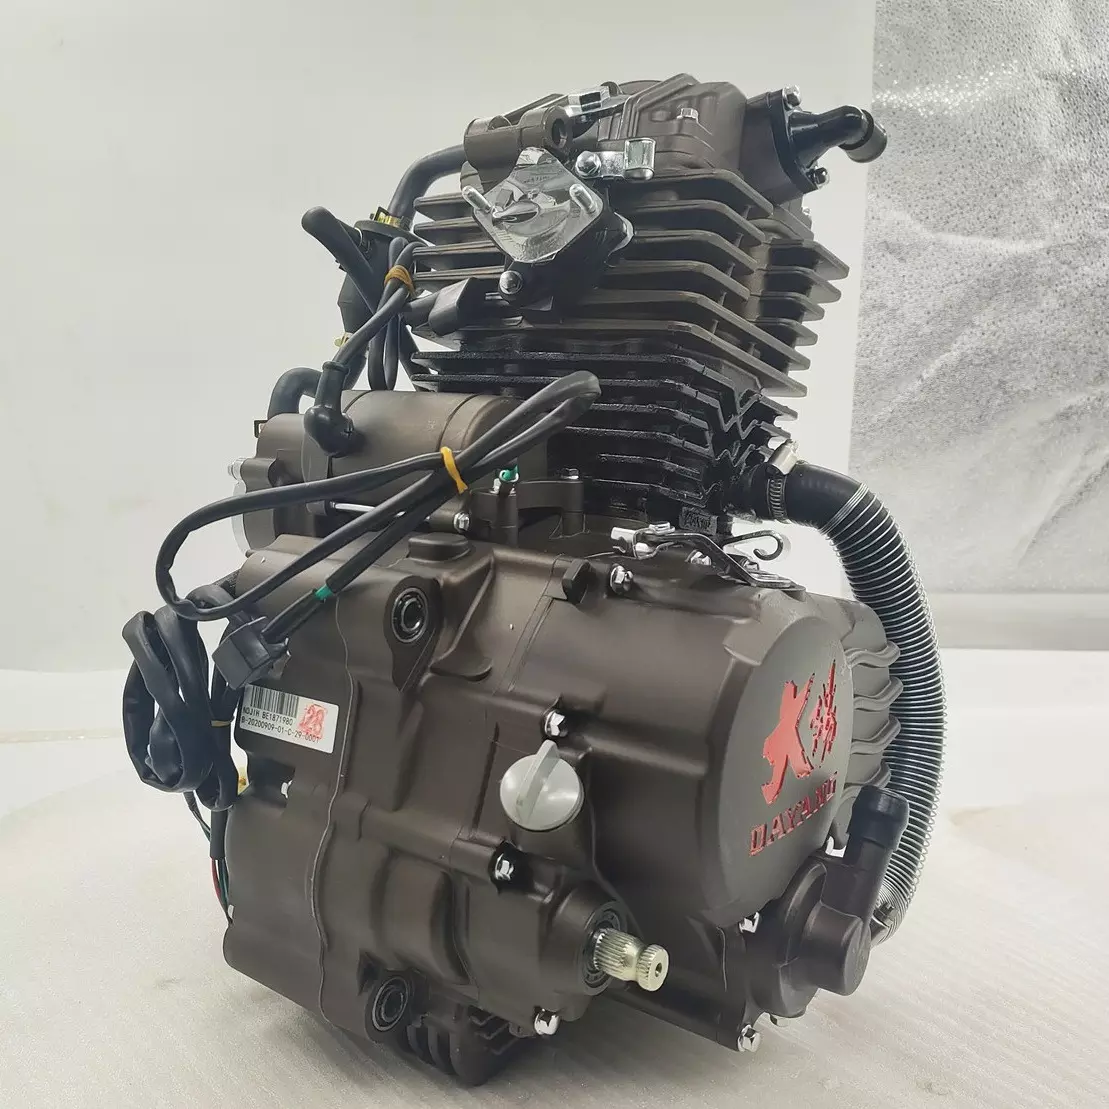 LIFAN/ZONGSHEN/LONCIN/DAYANG brand LF Wolf 250cc motorcycle engine water cooled 4 stroke motorcycle engine